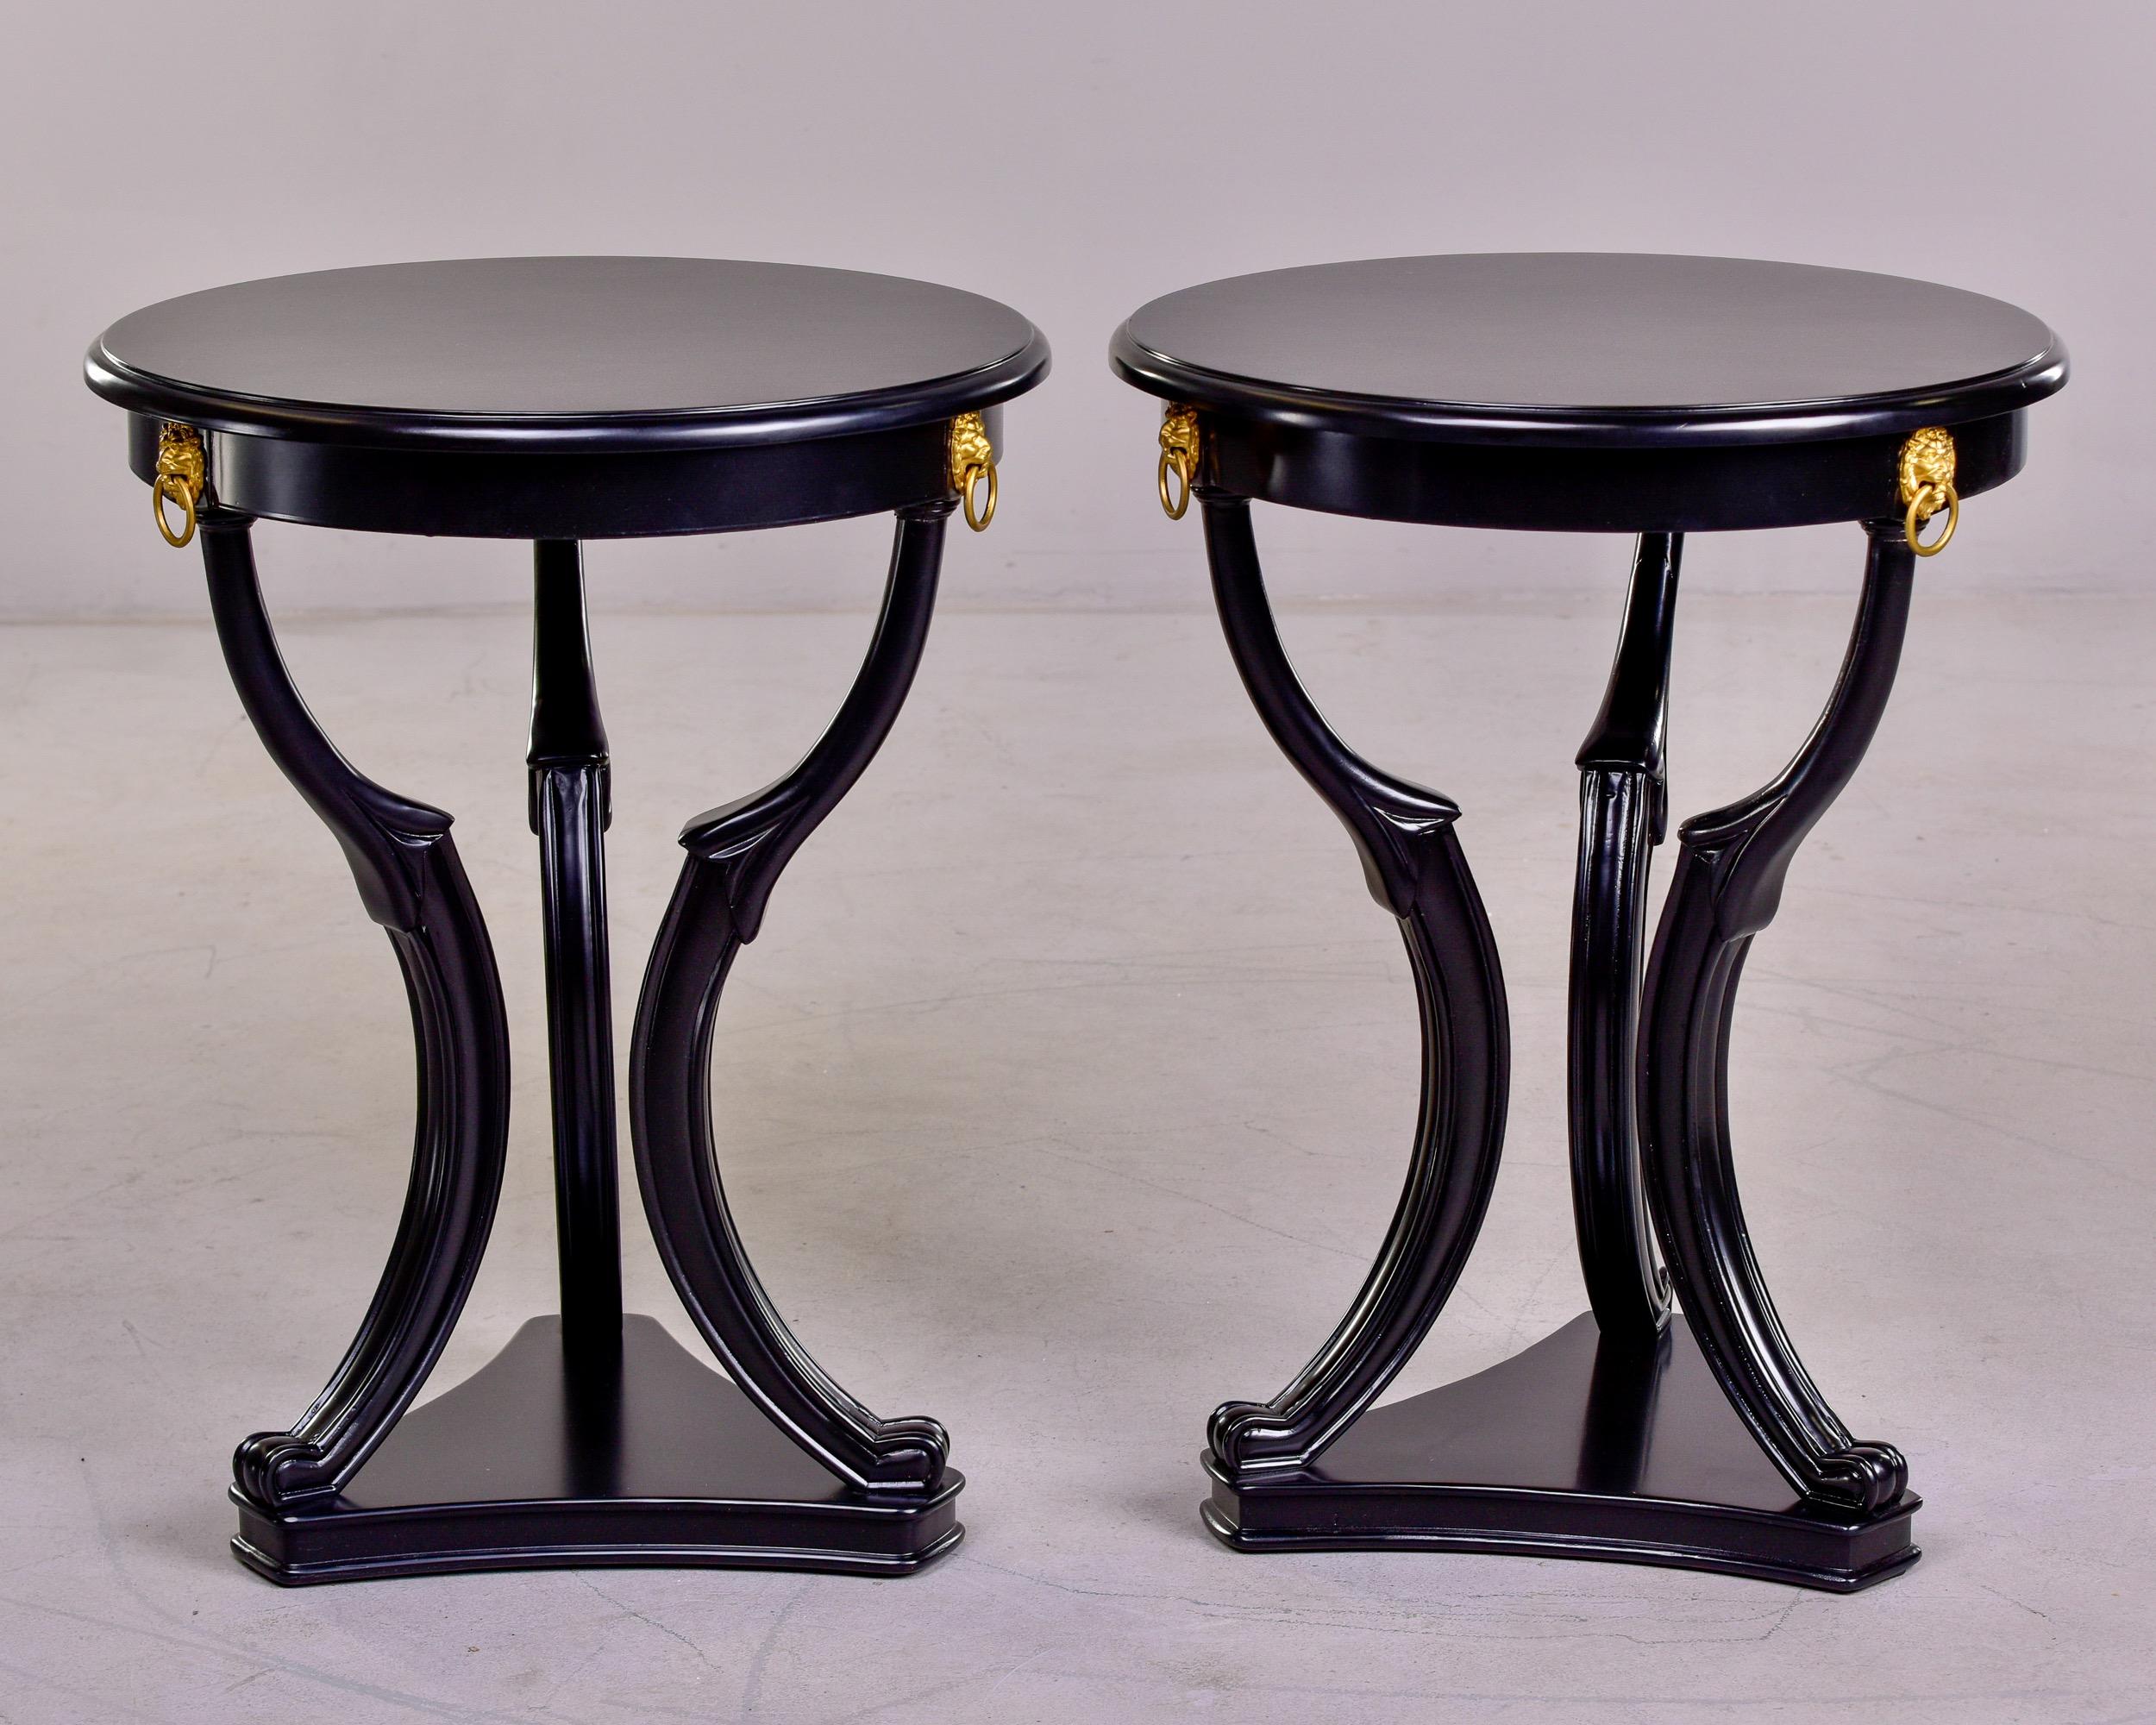 Pair of Early 20th C Neoclassical Black French Gueridon Side Tables 3